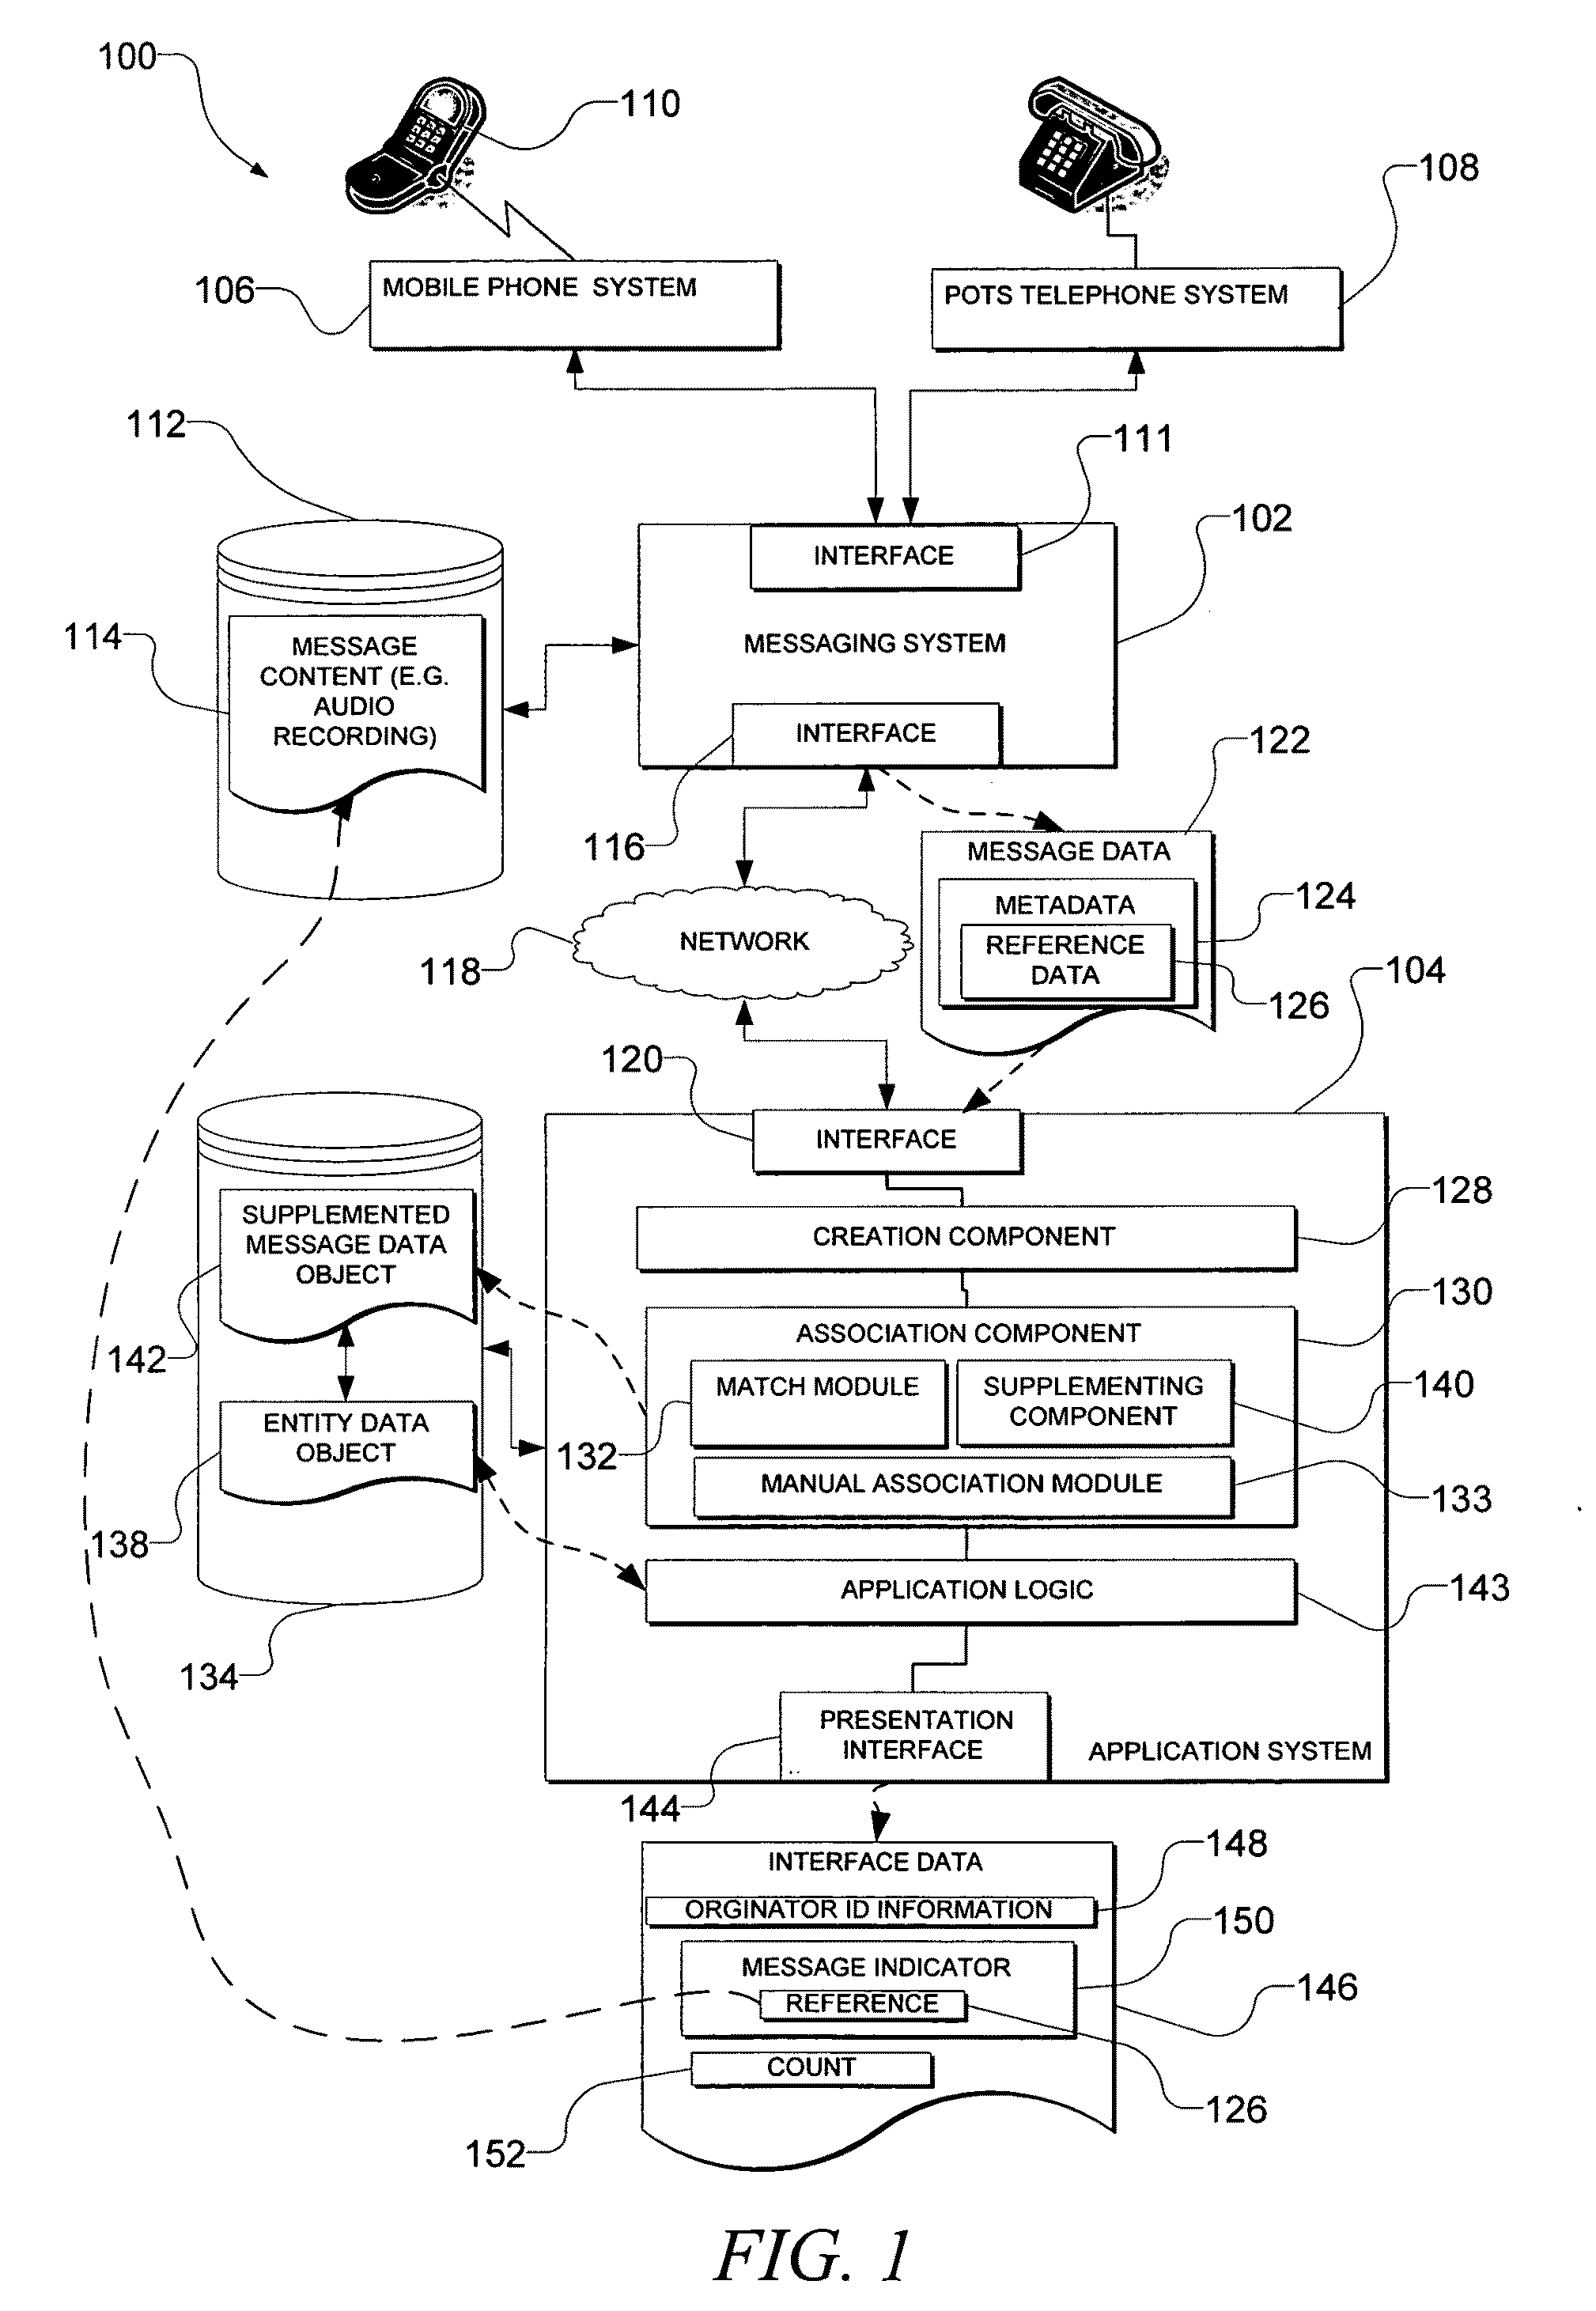 Messaging and application system integration